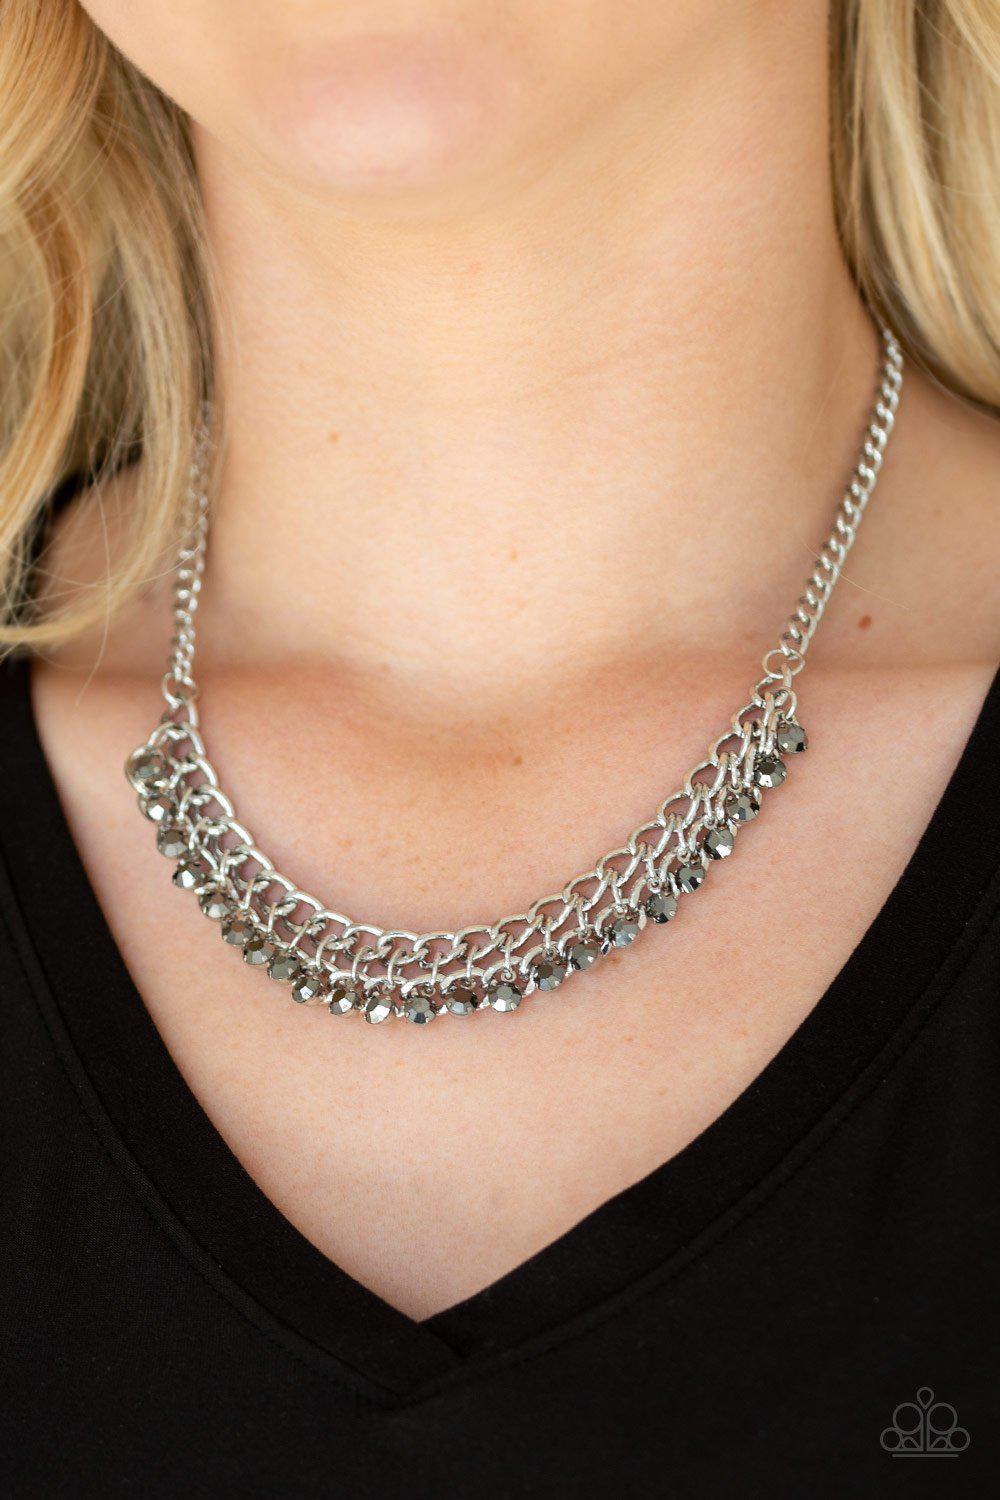 Glow and Grind Silver Hematite Rhinestone Necklace - Paparazzi Accessories - model -CarasShop.com - $5 Jewelry by Cara Jewels